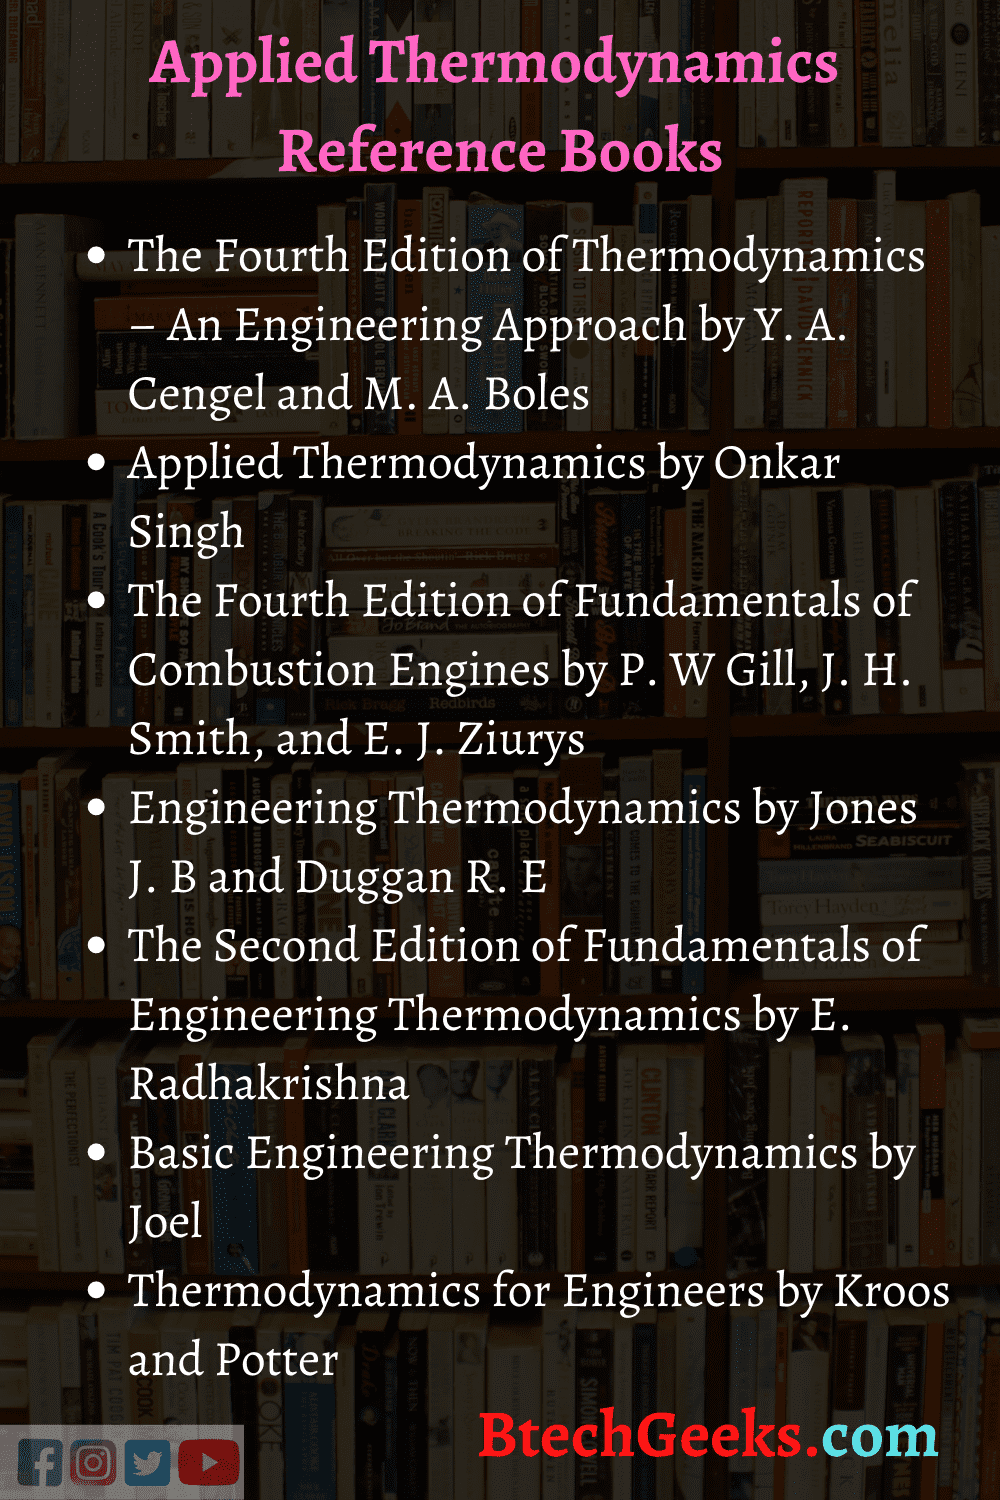 Applied Thermodynamics Reference Books